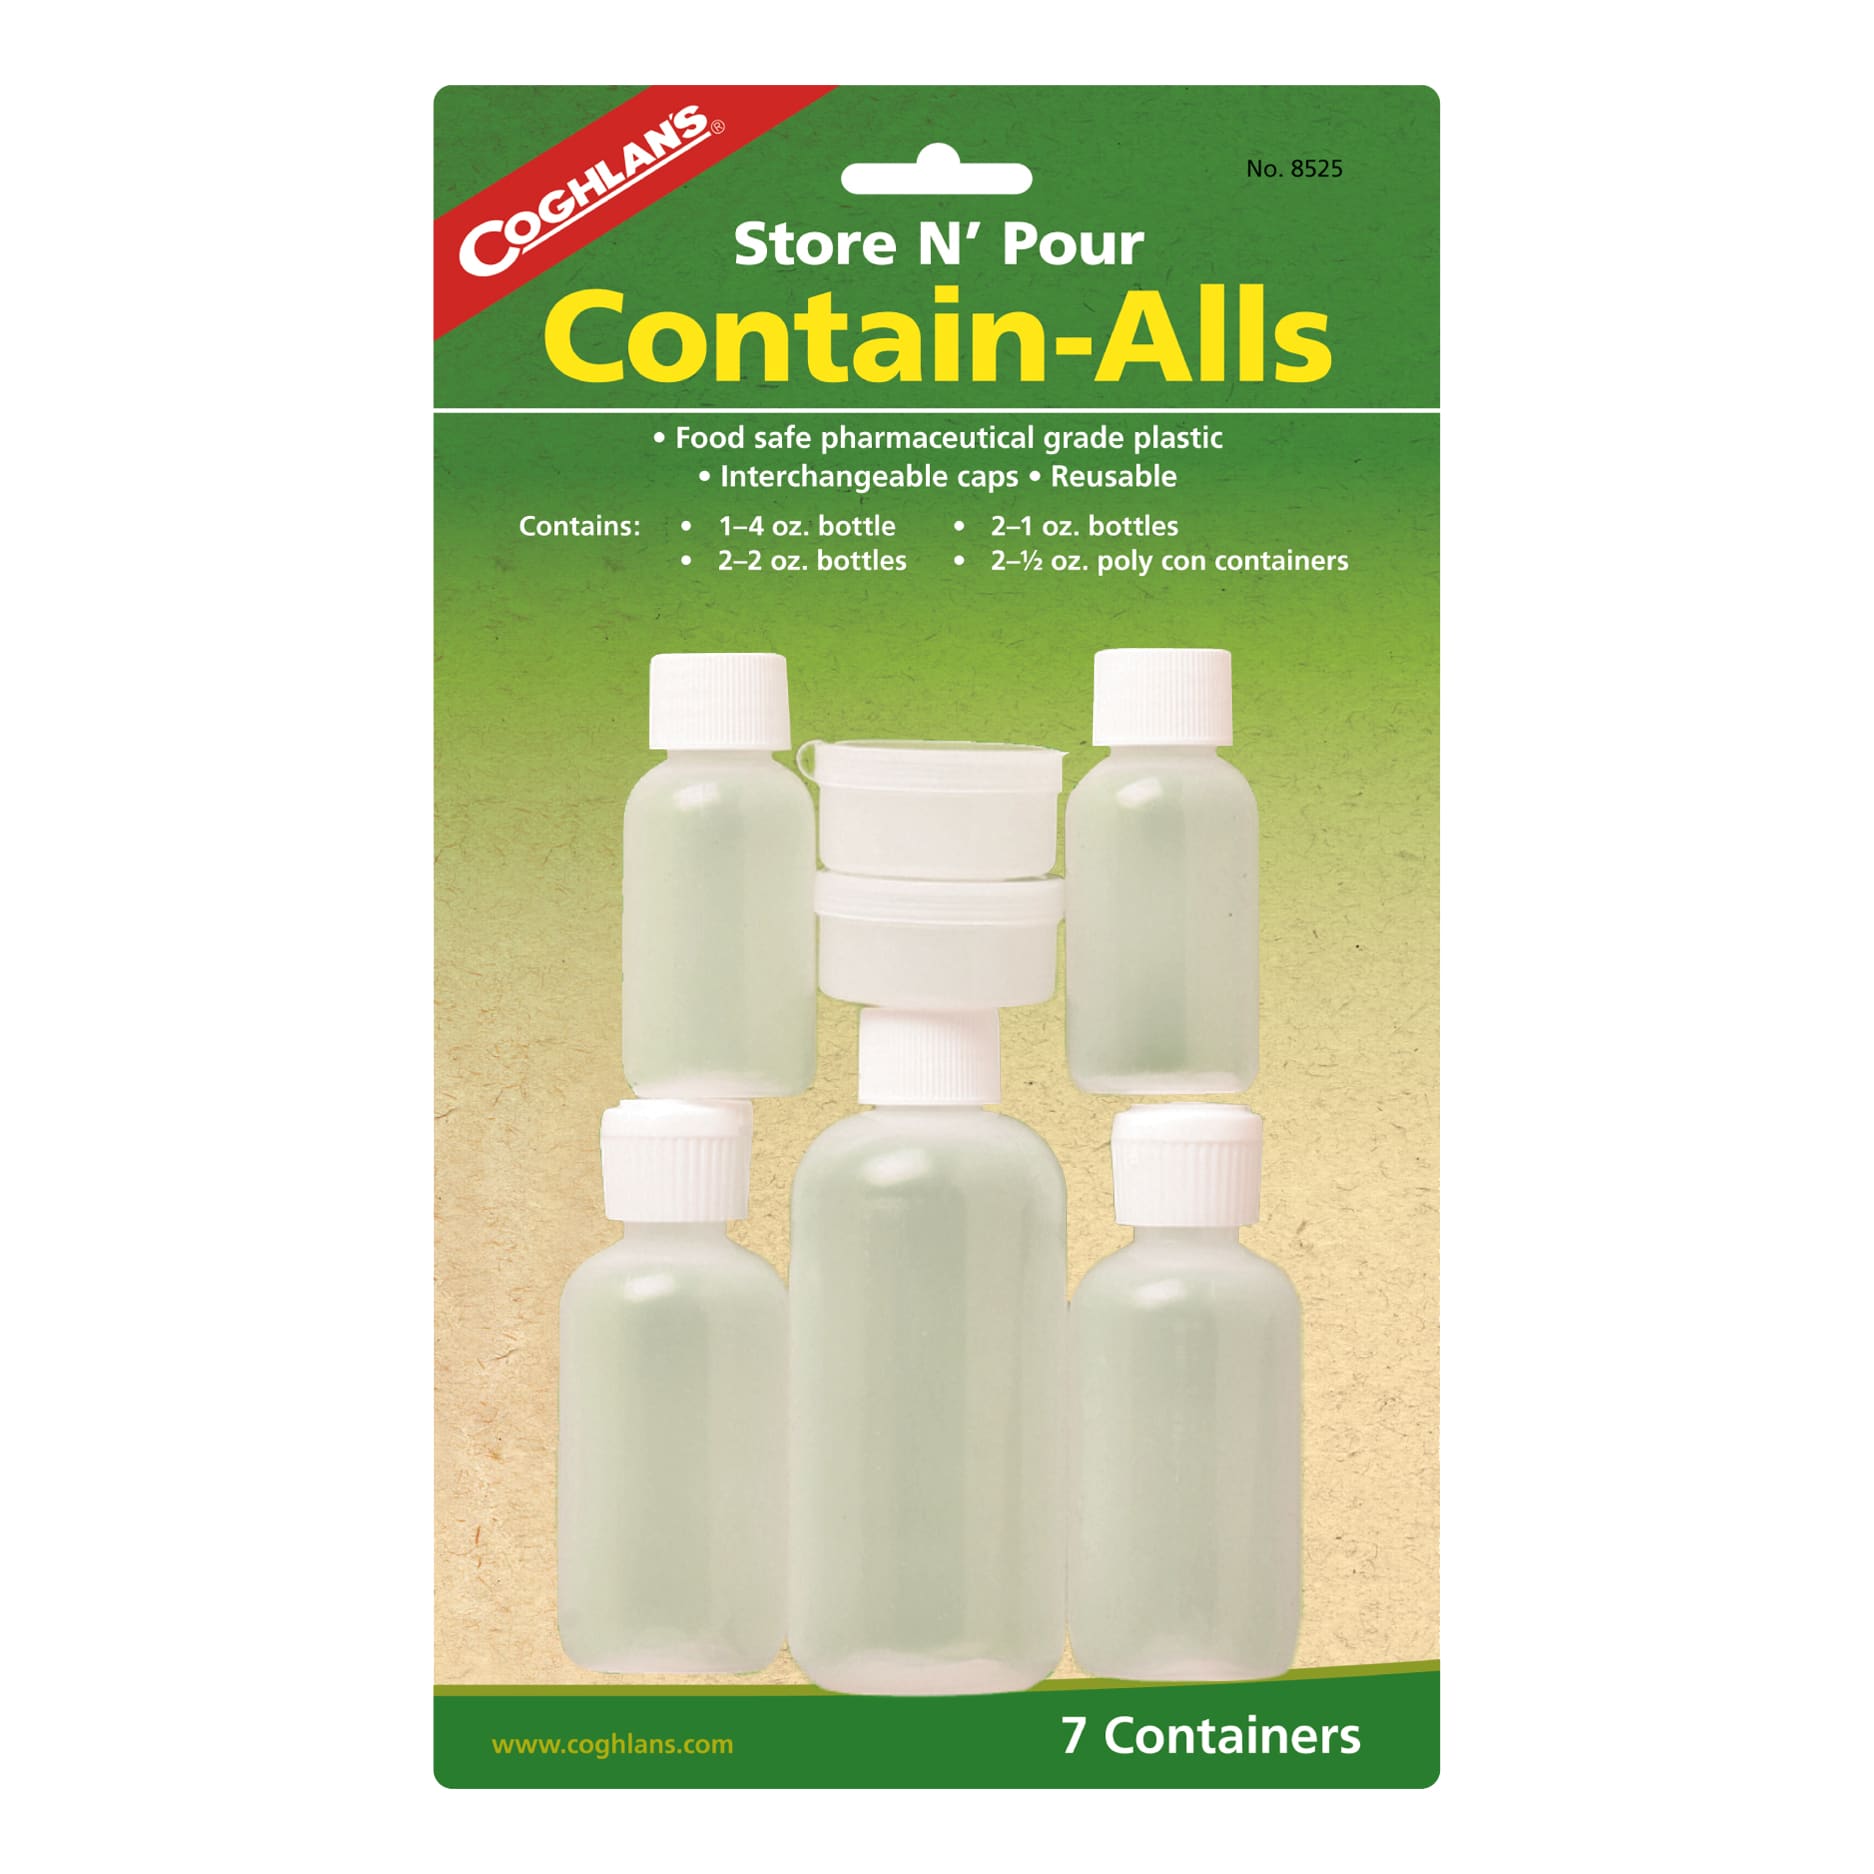 Coghlan's Contain-all Bottles